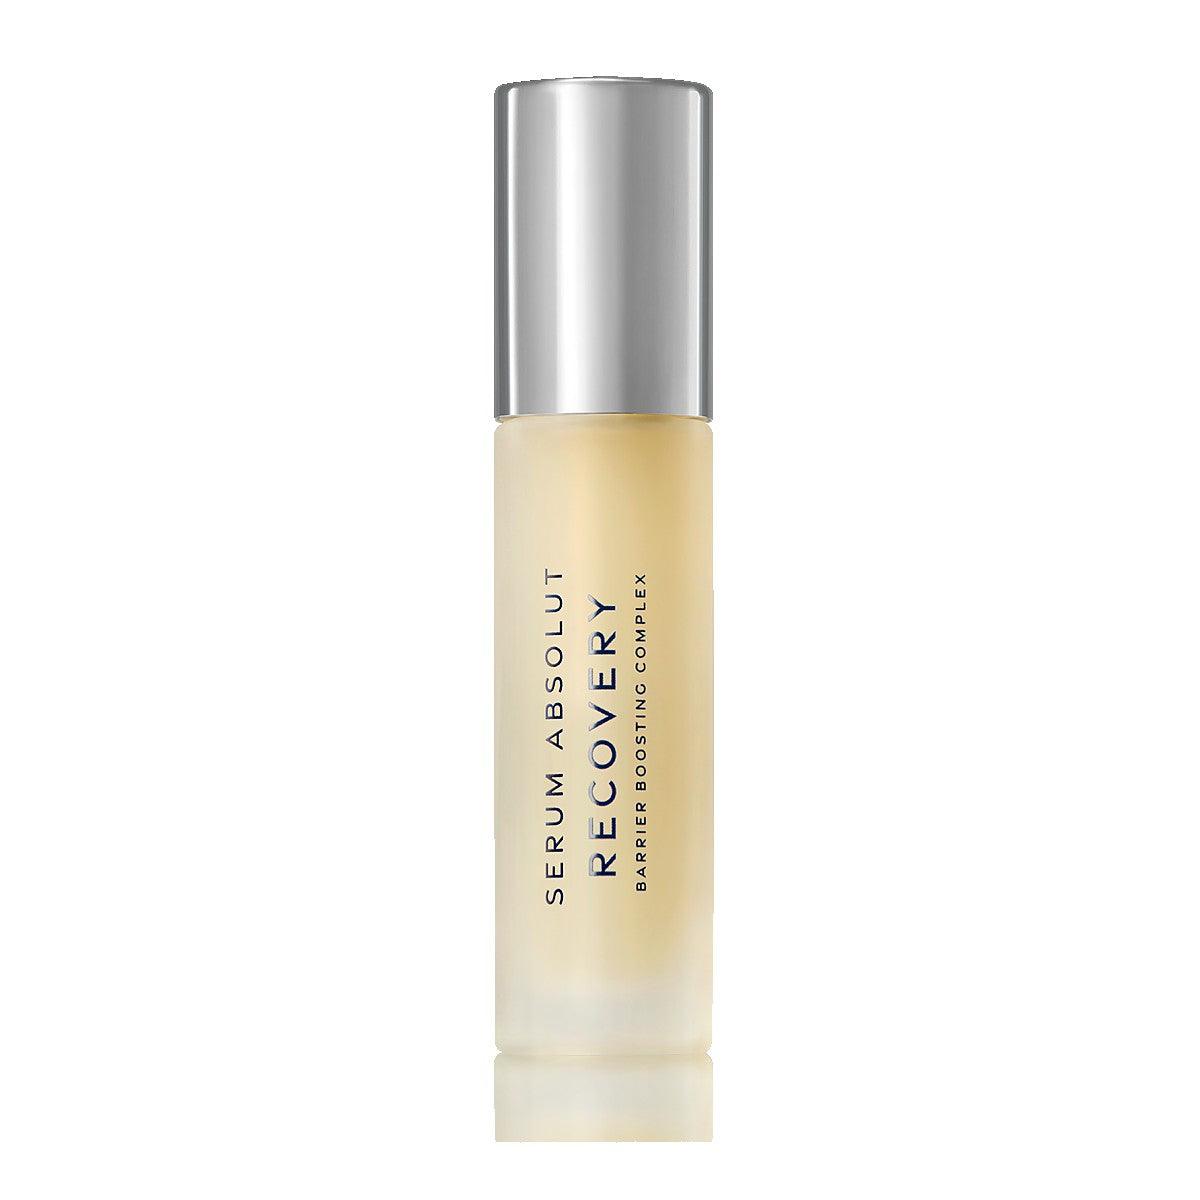 SERUM ABSOLUT RECOVERY Luzern Boutique Deauville